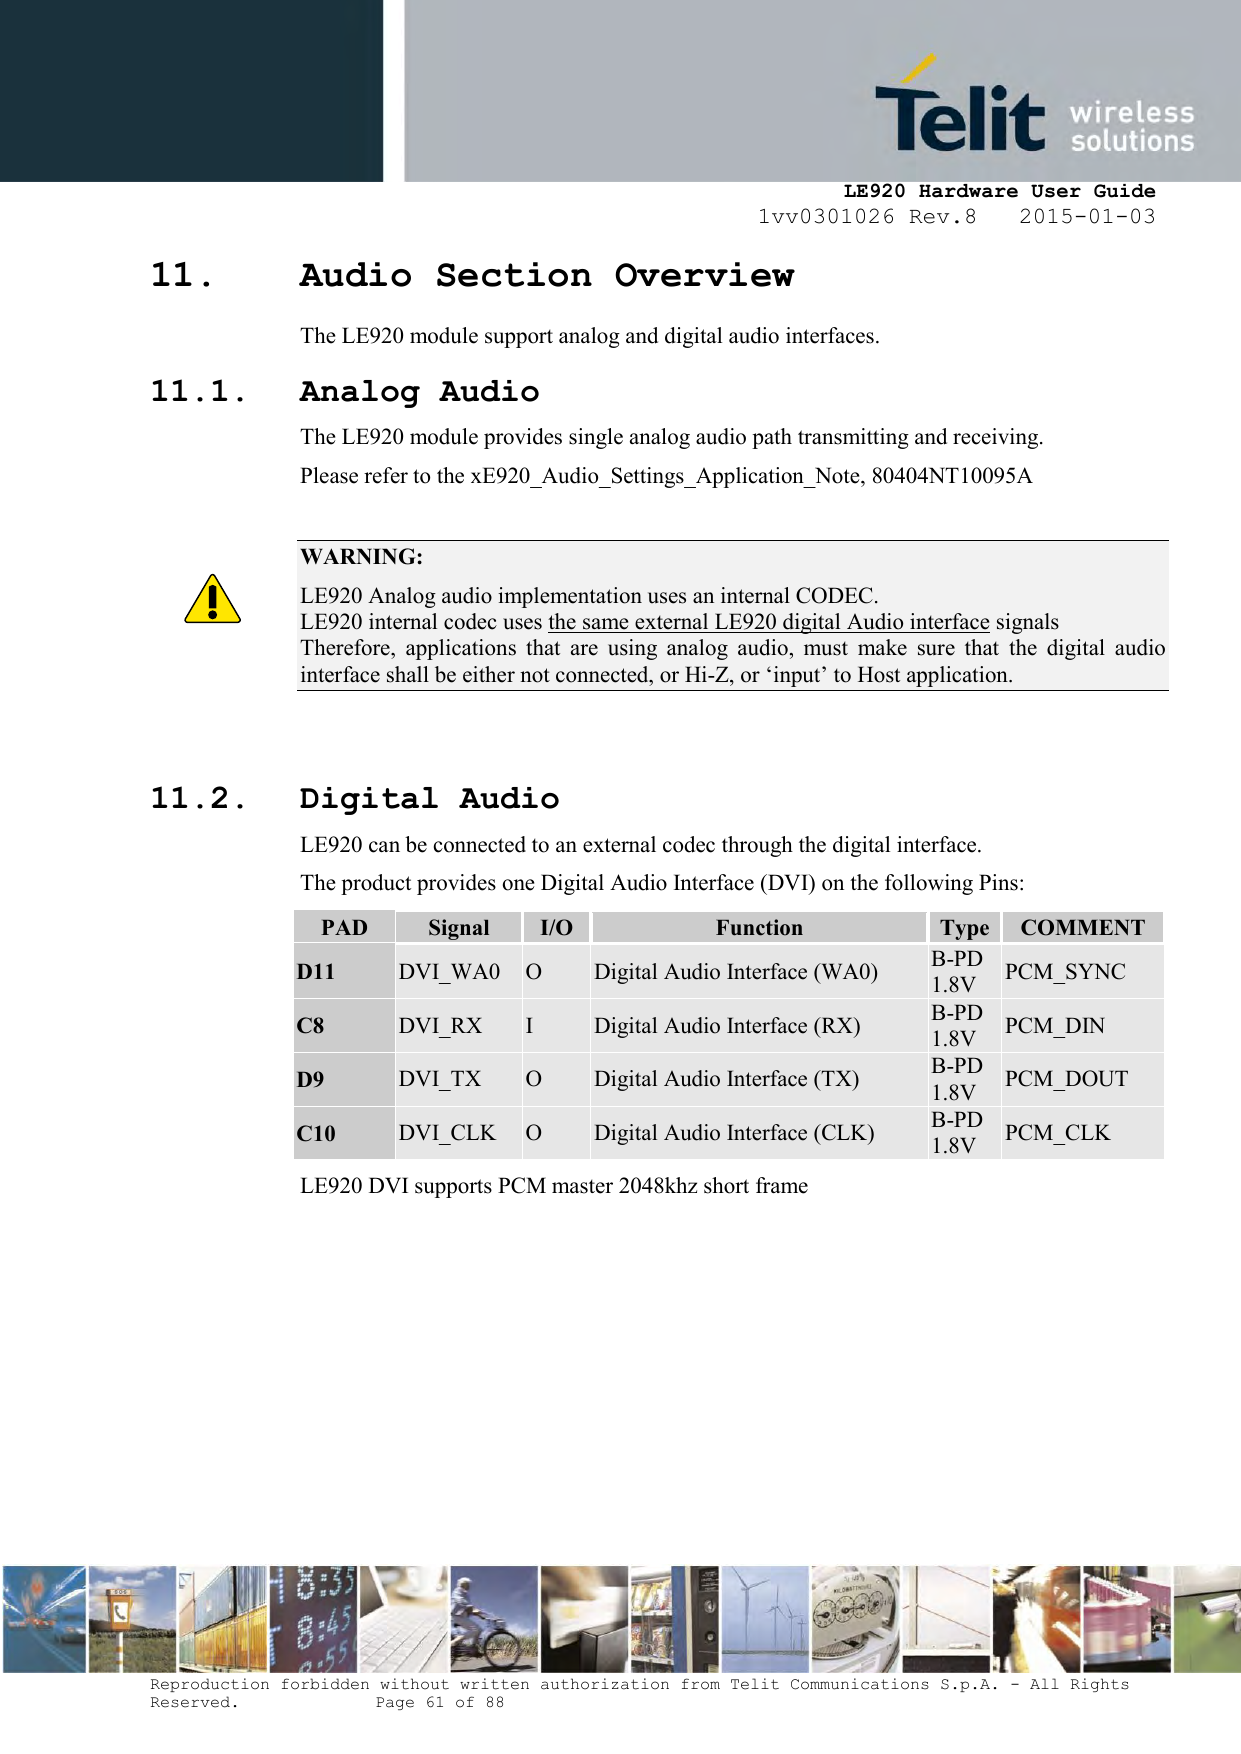     LE920 Hardware User Guide 1vv0301026 Rev.8   2015-01-03 Reproduction forbidden without written authorization from Telit Communications S.p.A. - All Rights Reserved.    Page 61 of 88  11. Audio Section Overview  The LE920 module support analog and digital audio interfaces. 11.1. Analog Audio The LE920 module provides single analog audio path transmitting and receiving. Please refer to the xE920_Audio_Settings_Application_Note, 80404NT10095A  WARNING: LE920 Analog audio implementation uses an internal CODEC.  LE920 internal codec uses the same external LE920 digital Audio interface signals Therefore,  applications  that  are  using  analog  audio,  must  make  sure  that  the  digital  audio interface shall be either not connected, or Hi-Z, or ‘input’ to Host application.   11.2. Digital Audio LE920 can be connected to an external codec through the digital interface. The product provides one Digital Audio Interface (DVI) on the following Pins: PAD Signal I/O Function Type COMMENT D11 DVI_WA0 O Digital Audio Interface (WA0) B-PD 1.8V PCM_SYNC C8 DVI_RX I Digital Audio Interface (RX) B-PD 1.8V PCM_DIN D9 DVI_TX O Digital Audio Interface (TX) B-PD 1.8V PCM_DOUT C10 DVI_CLK O Digital Audio Interface (CLK) B-PD 1.8V PCM_CLK LE920 DVI supports PCM master 2048khz short frame  